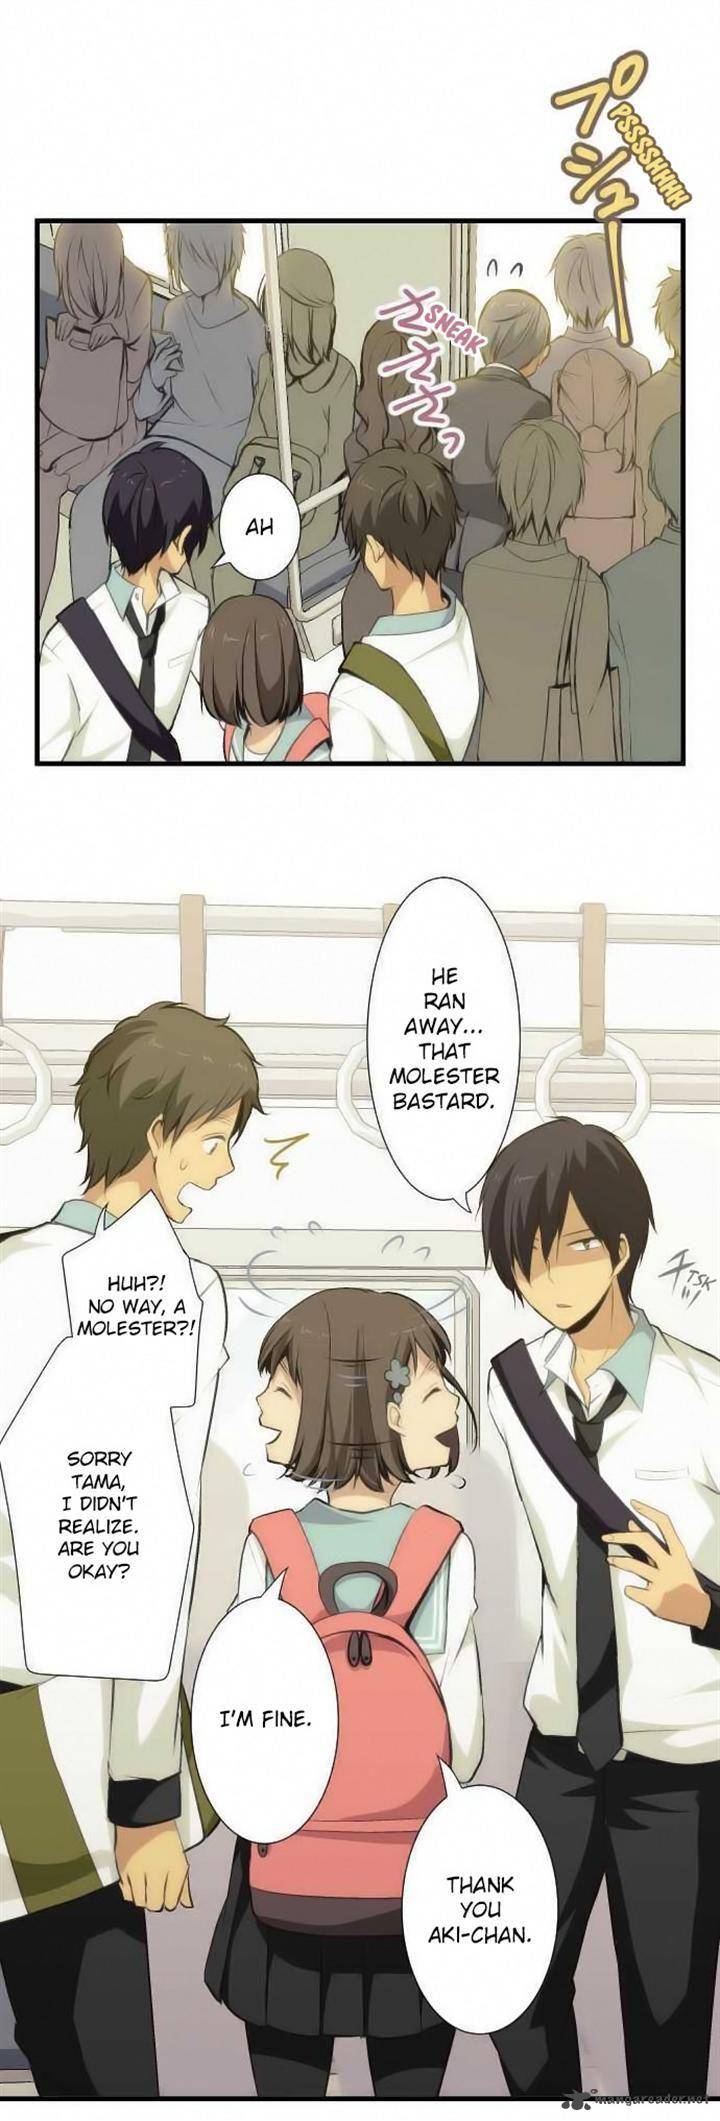 Relife 62 4